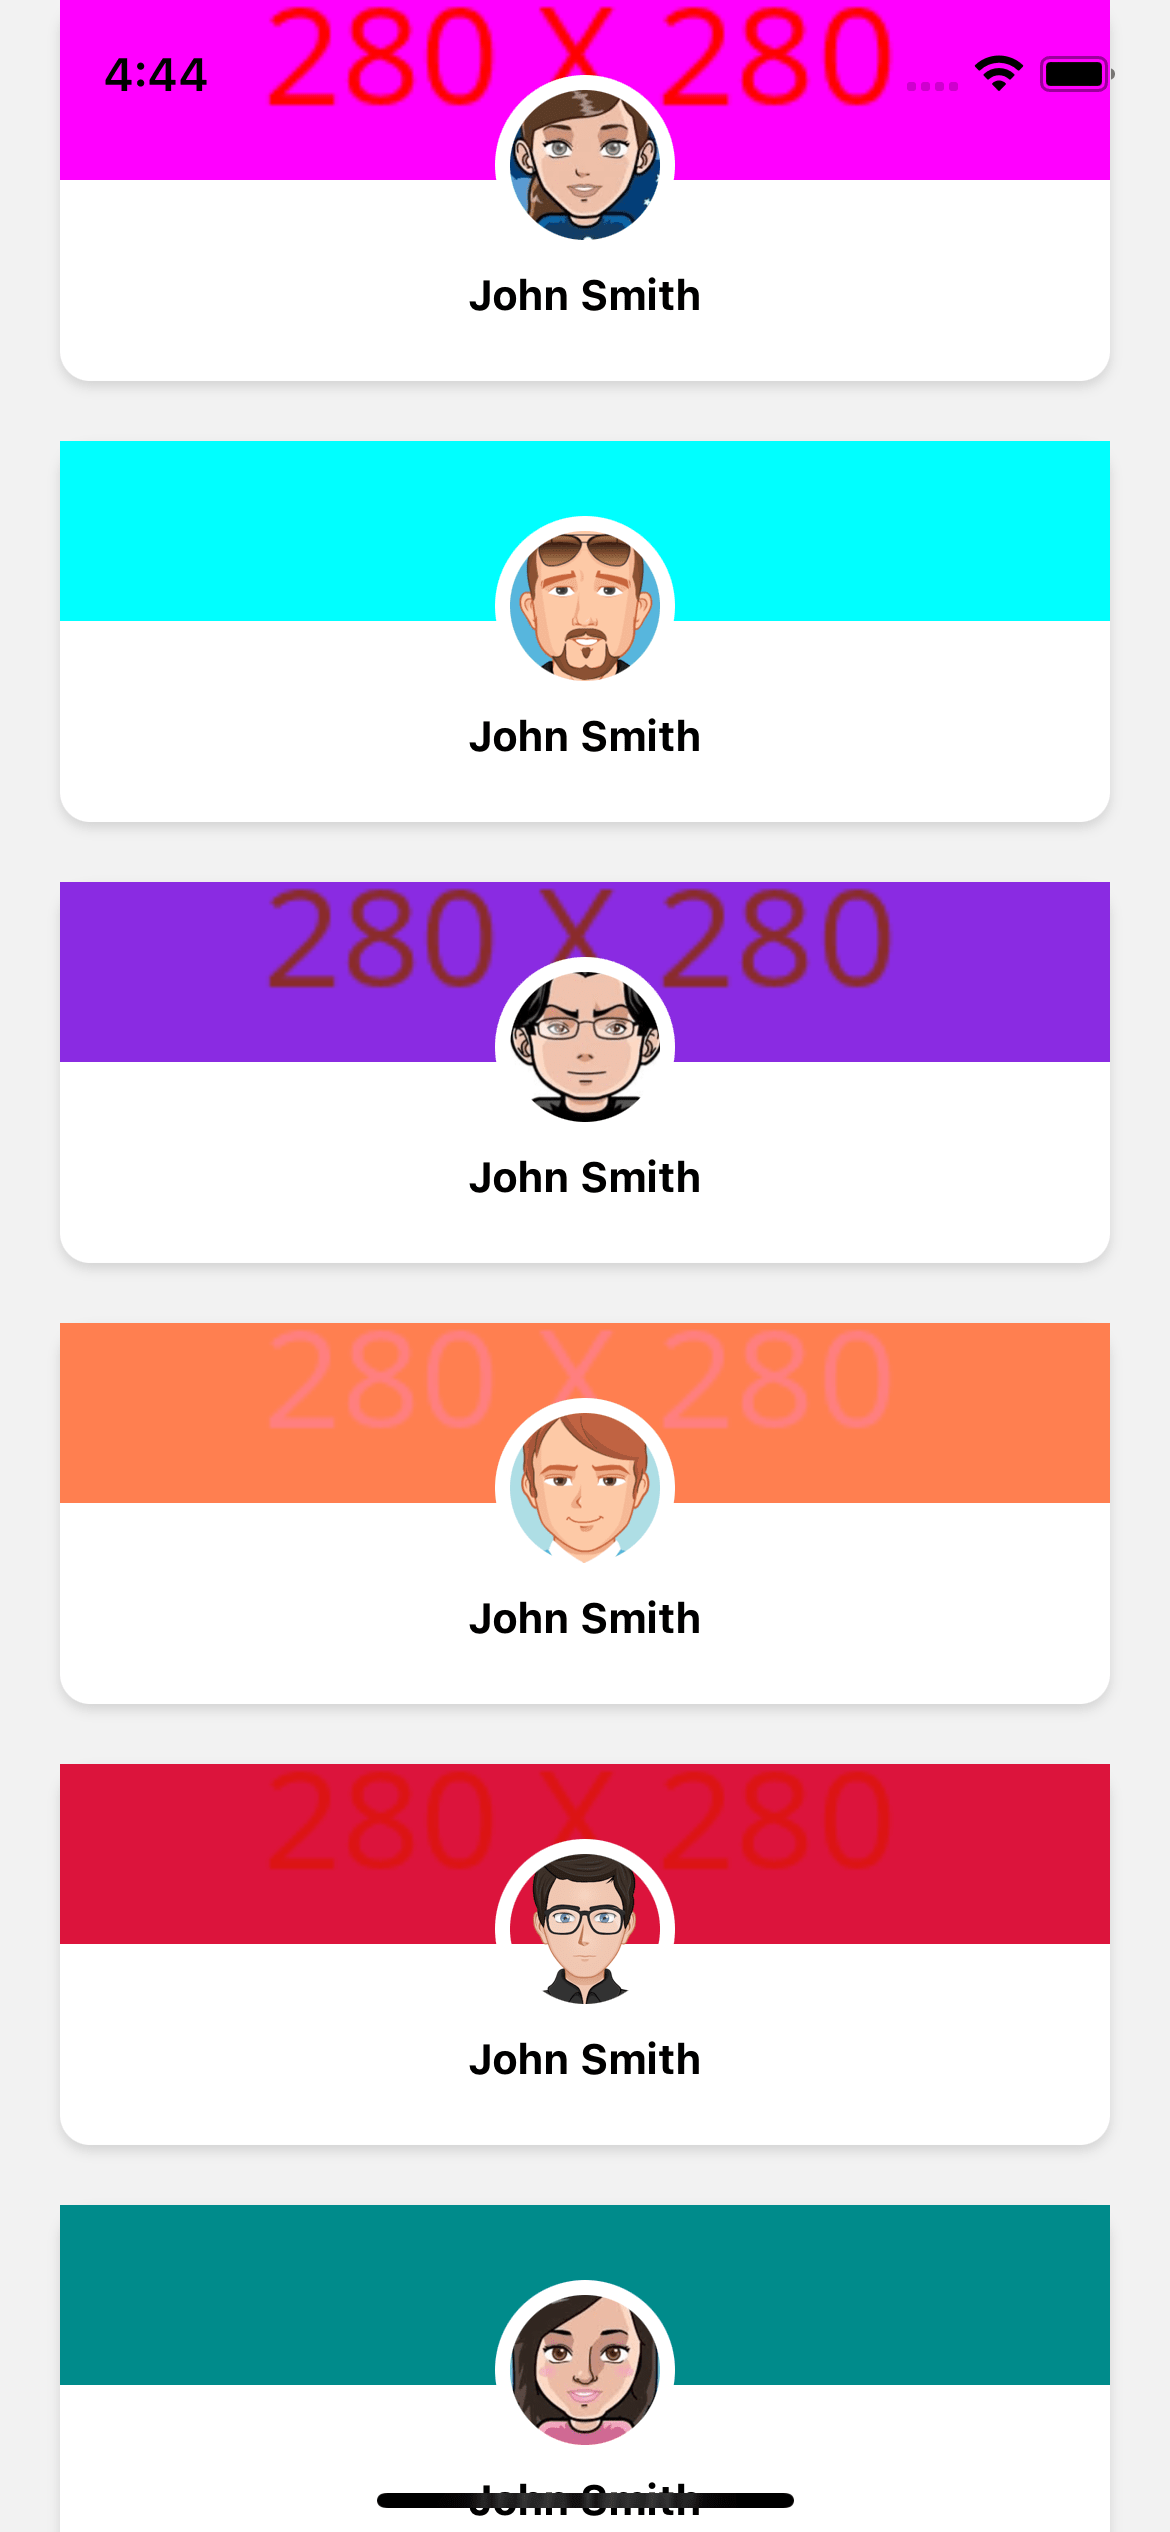 react native UI example. Profile cards with avatar and name